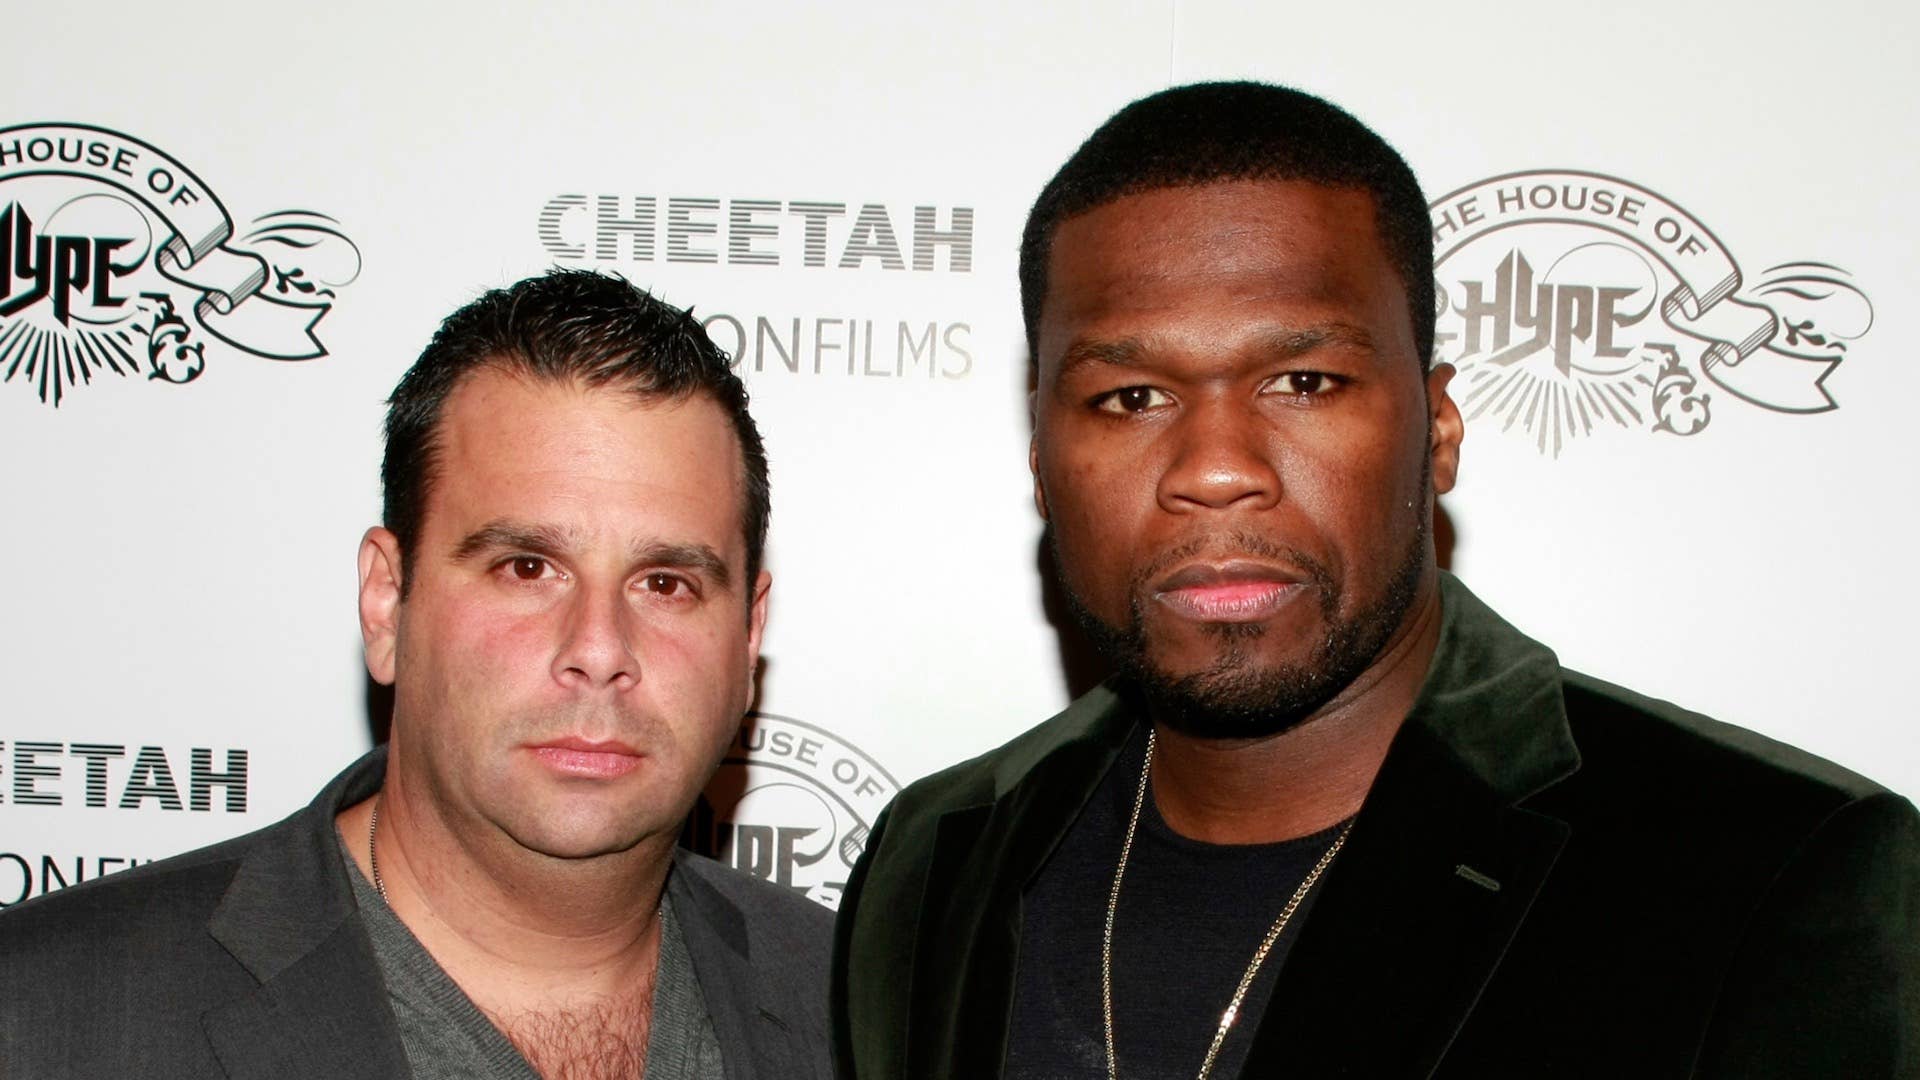 Producer Randall Emmett and Curtis '50 Cent' Jackson attend the House of Hype LIVEstyle Lounge